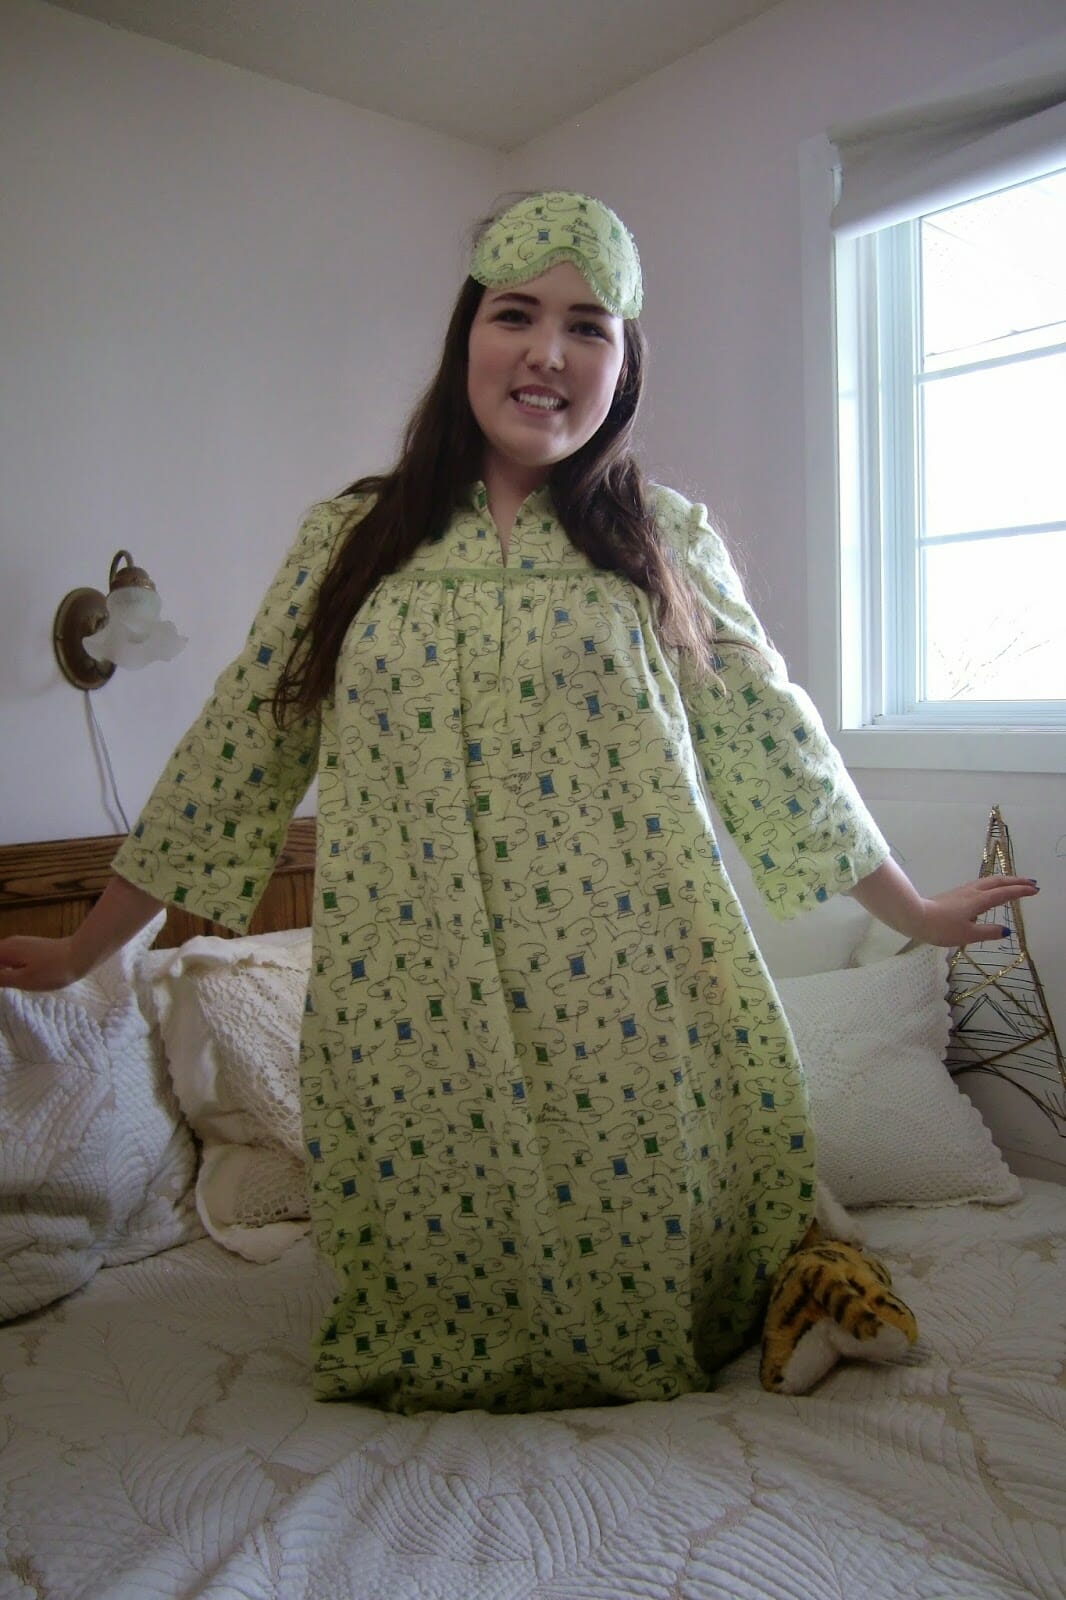 Mom-Made: Vintage Sewing Themed Nightie!